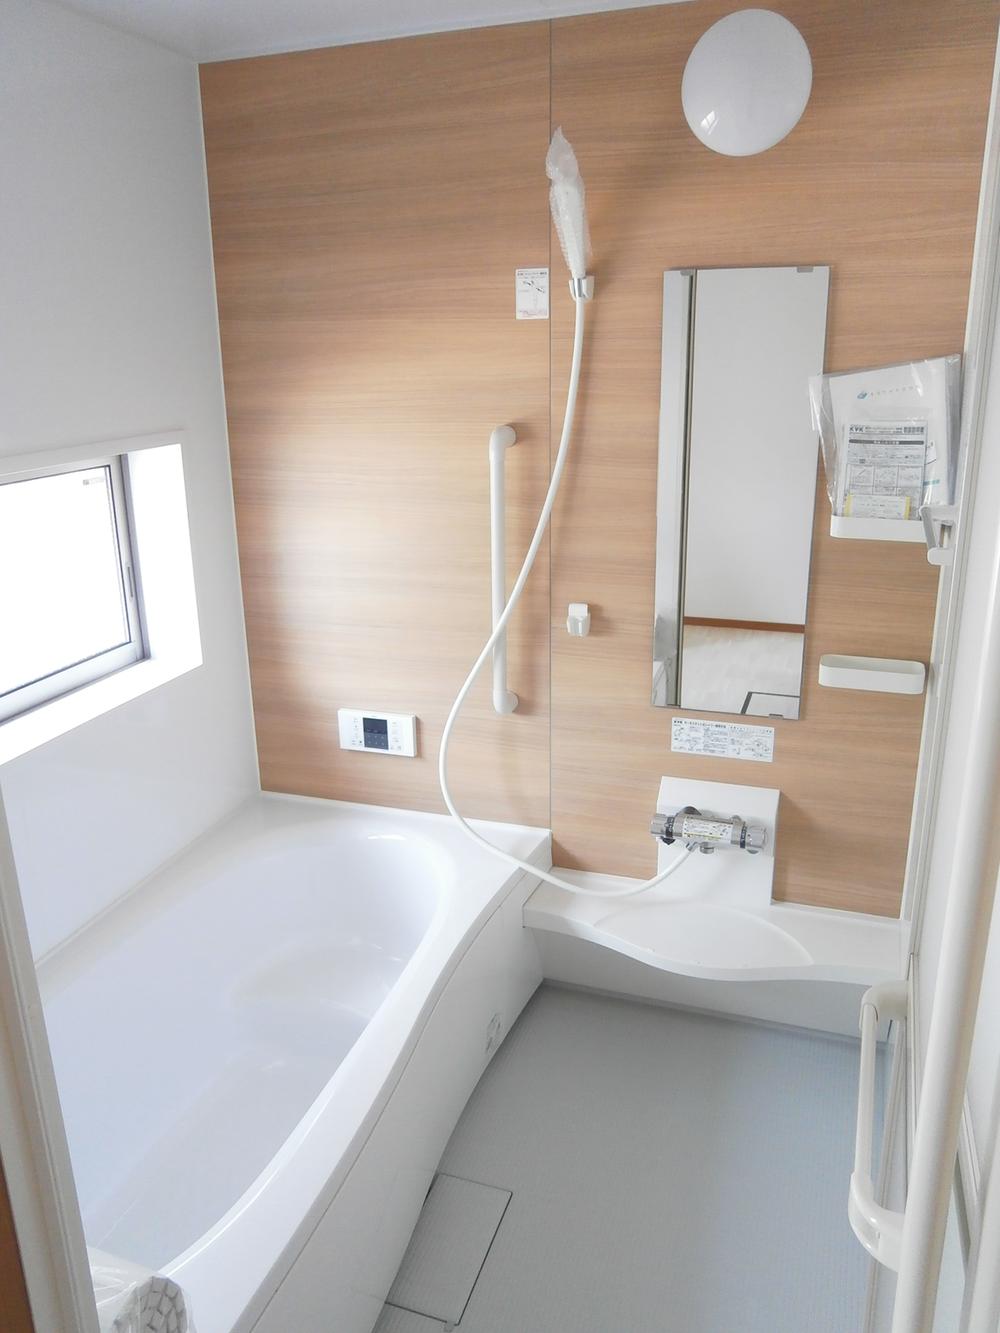 Same specifications photo (bathroom). Same specification bathroom It is also useful cleaning if there is a window.